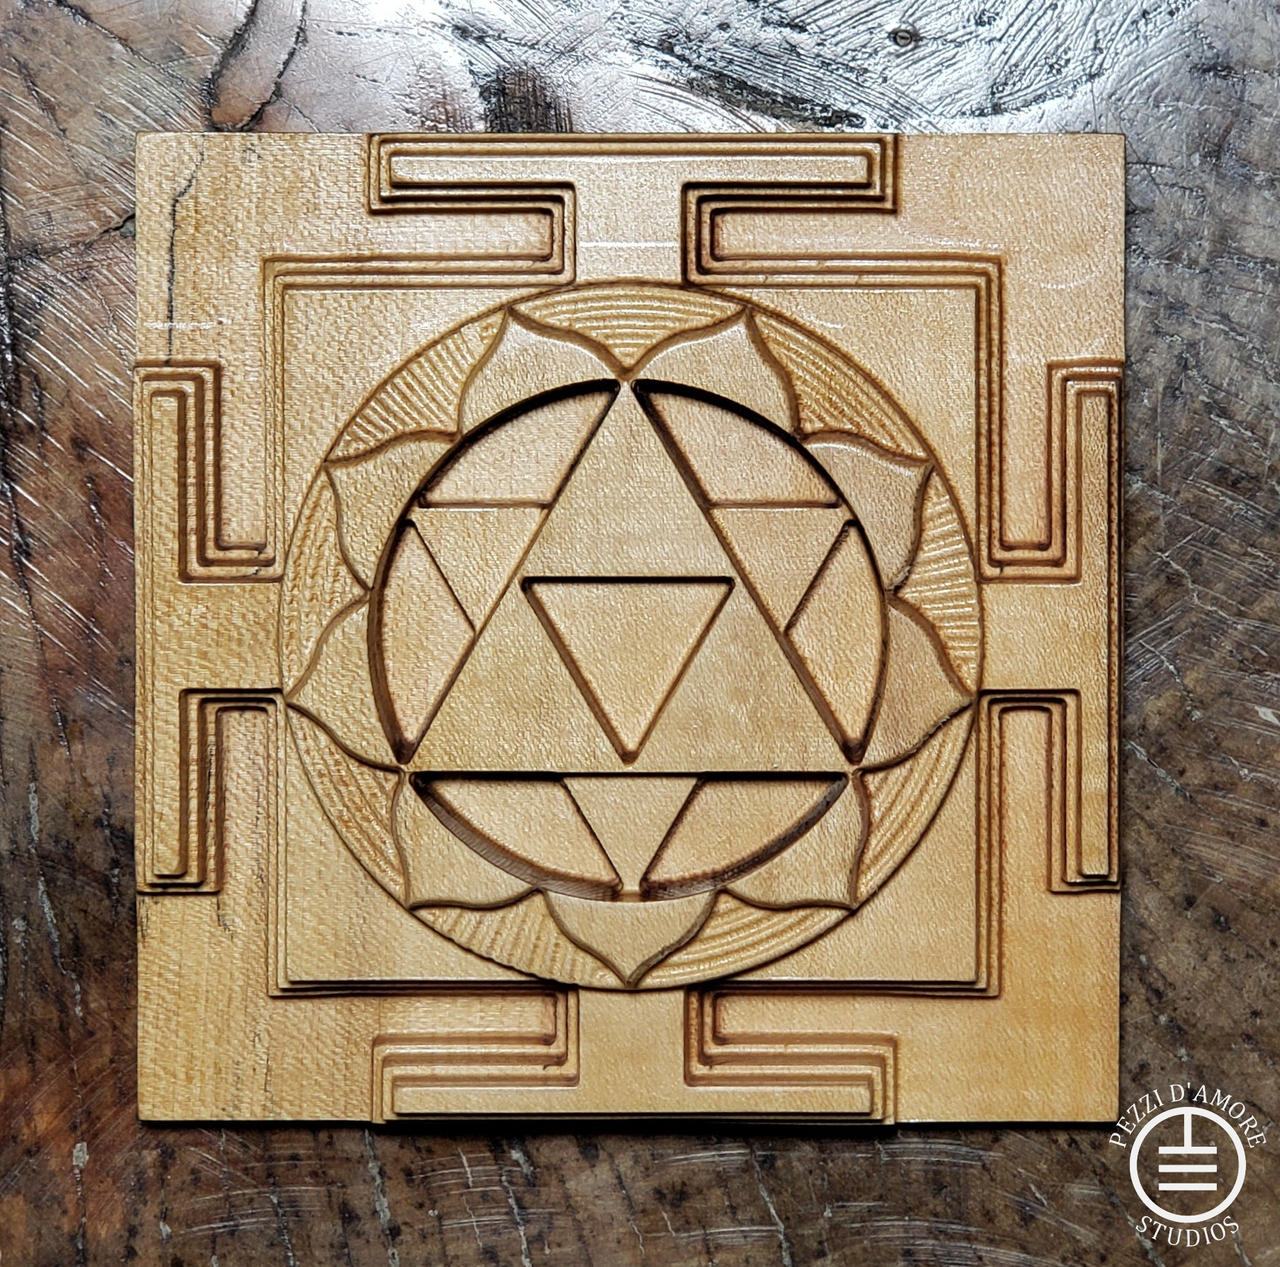 Artistic and Quirky Sri Yantra Pendant at Lowest Prices 